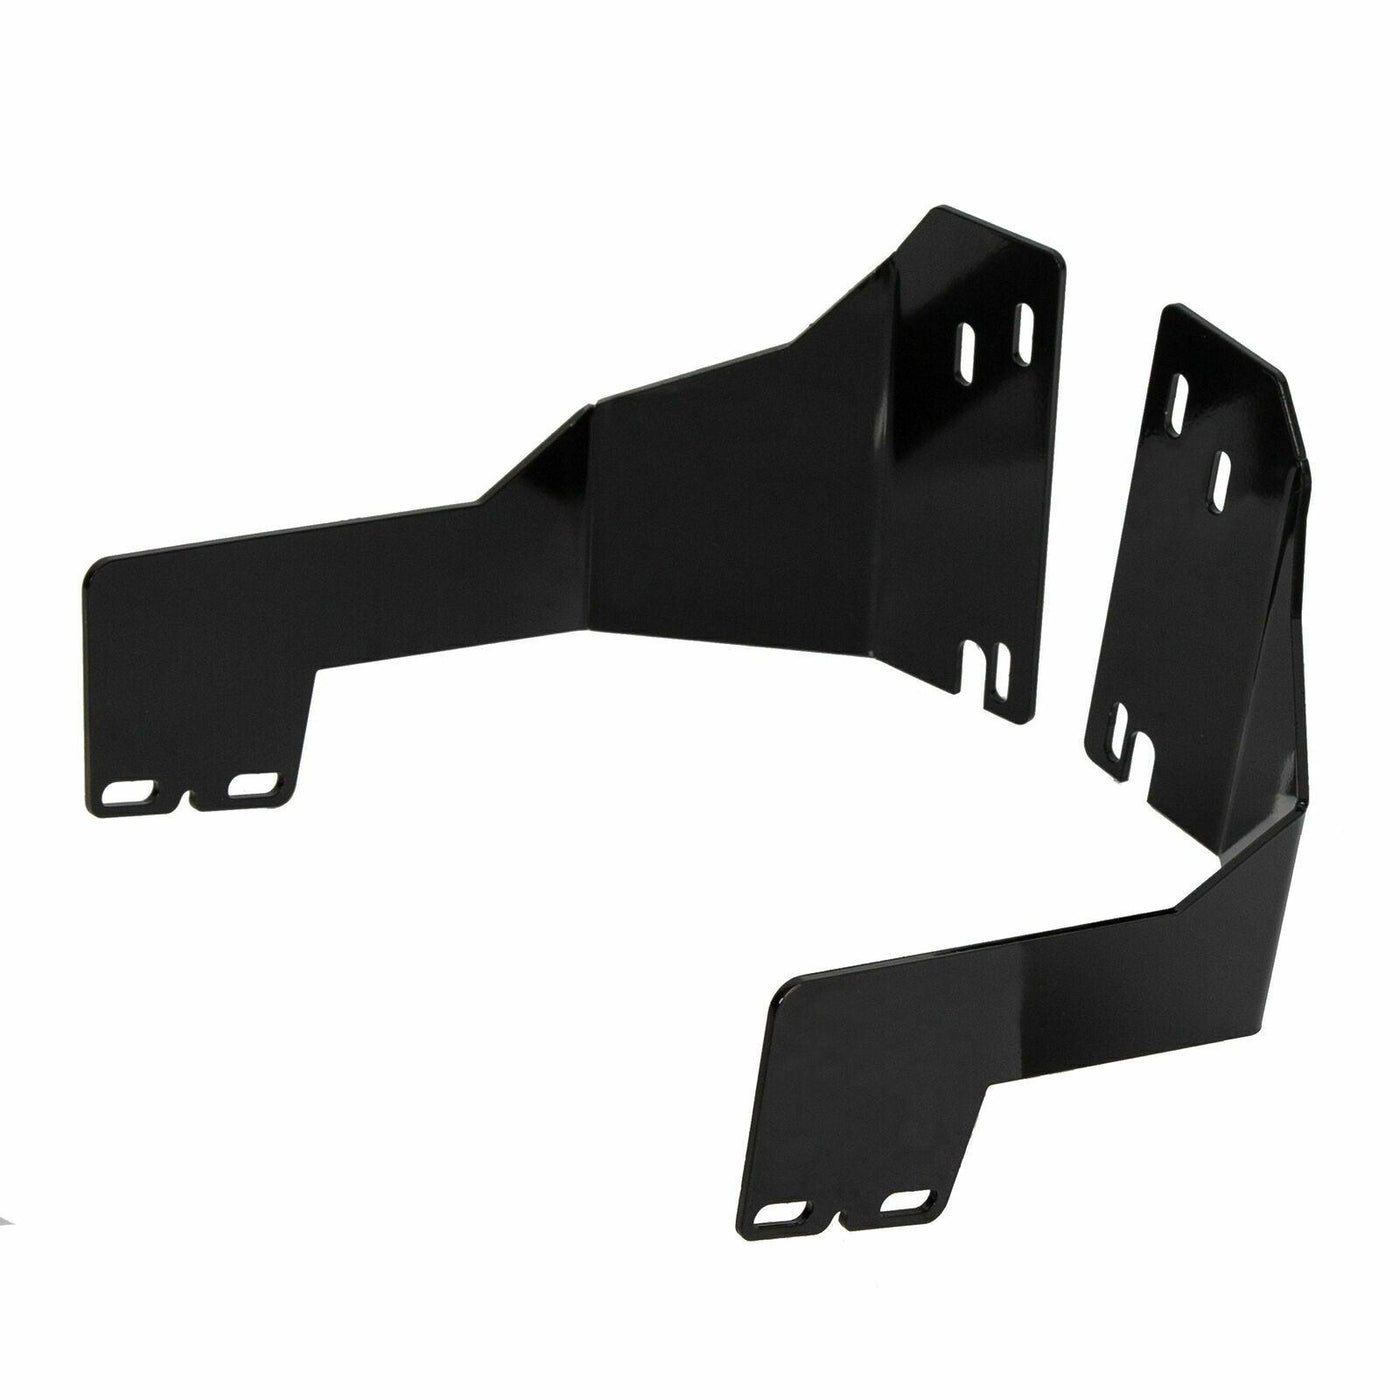 New Pair Fairing Support Bracket For 98-13 Harley Road Glide Bagger FLTR - Moto Life Products